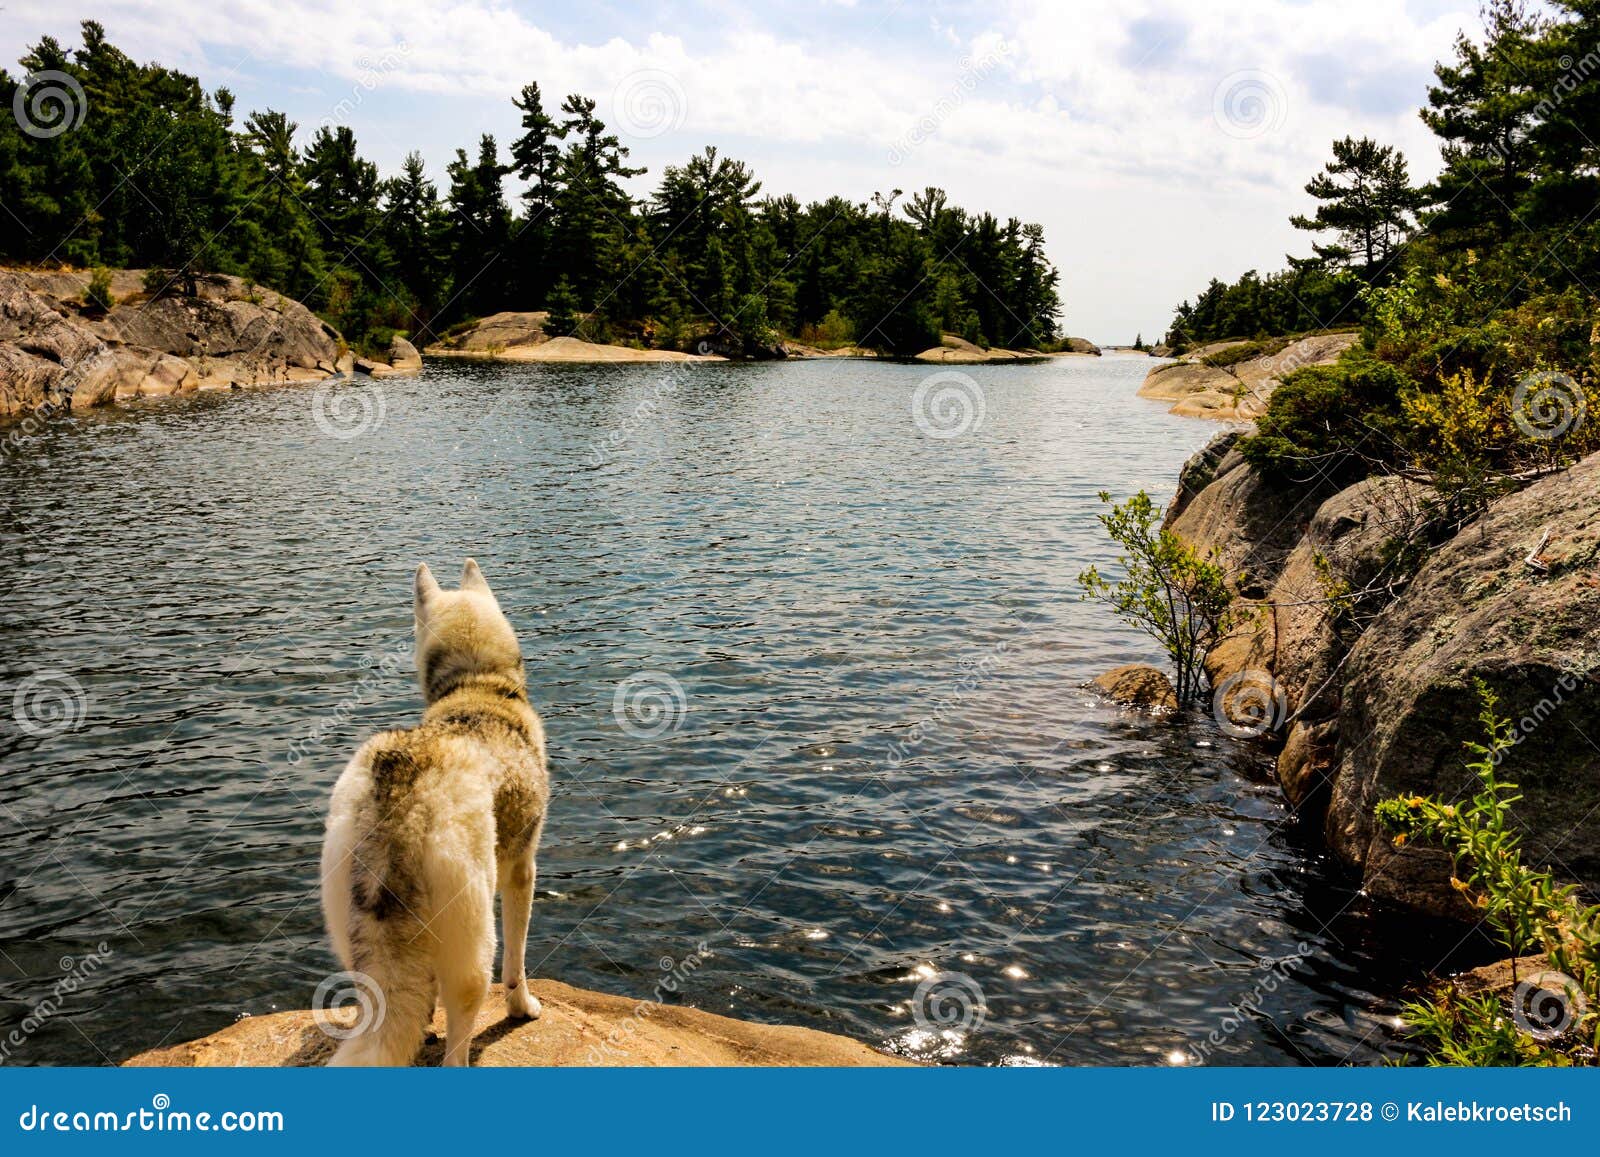 siberian husky on the shores of lake looking very majestic